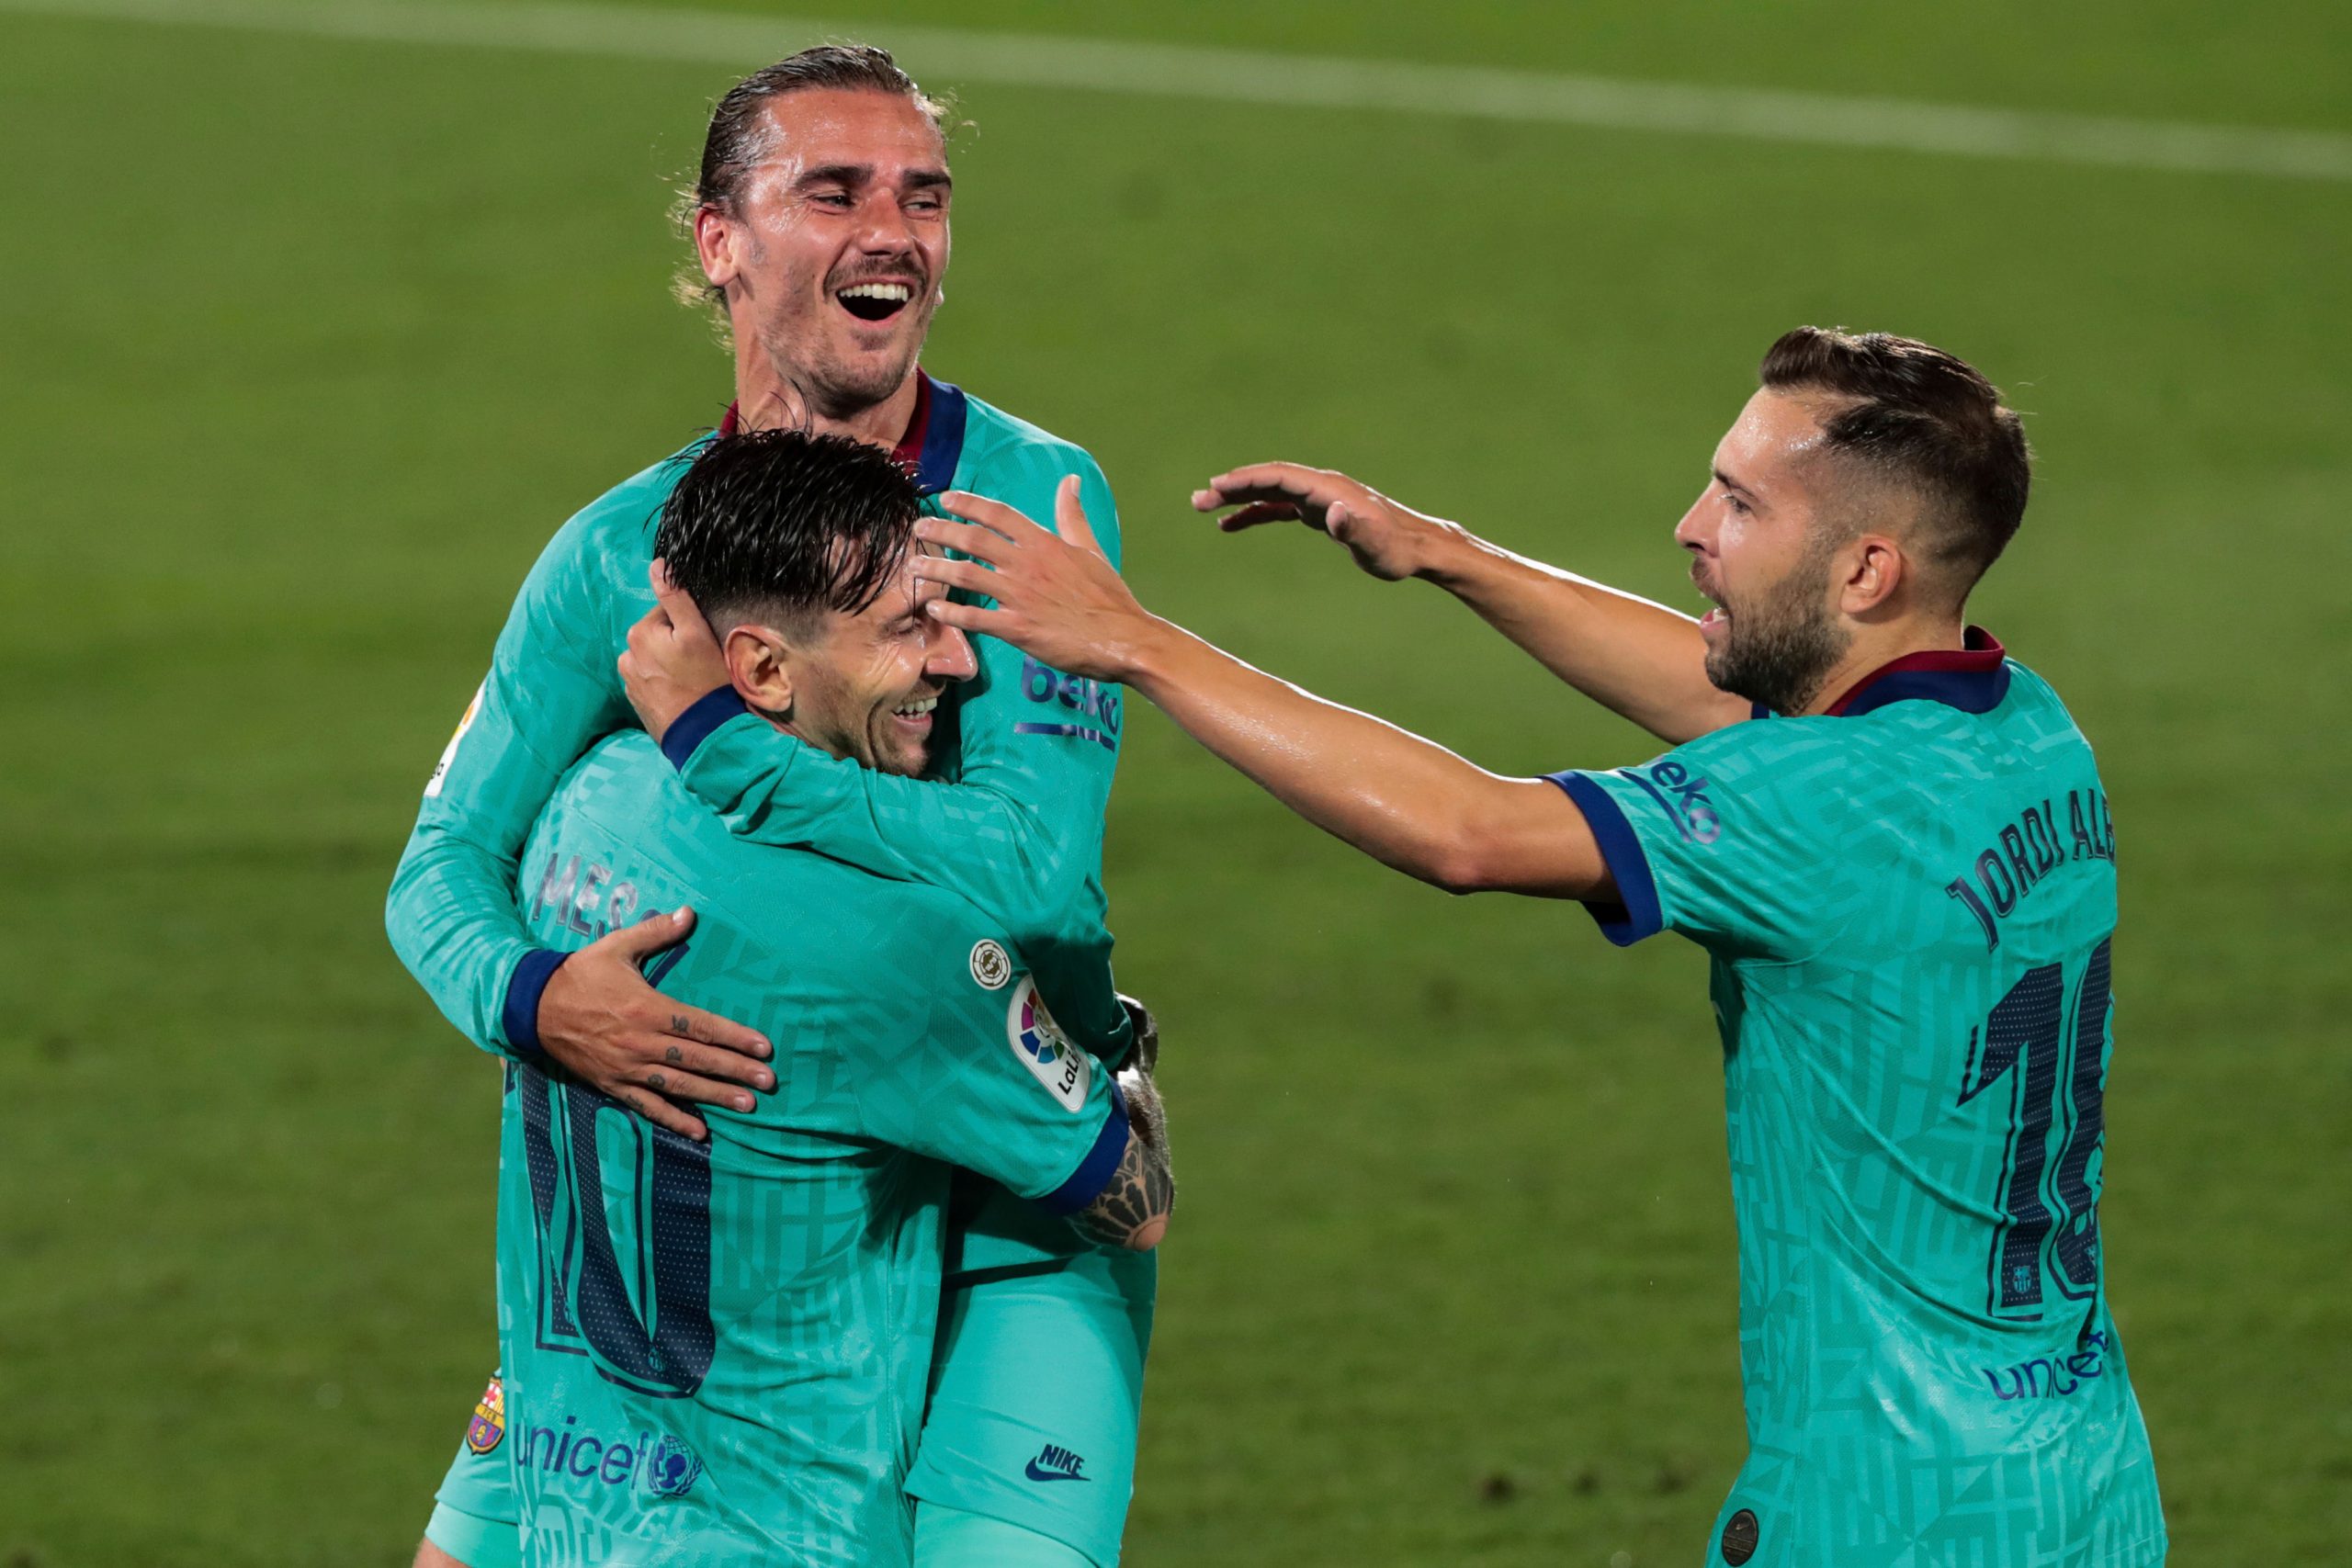 Barcelona’s Antoine Griezmann says ending Huawei contract over Uighurs claims